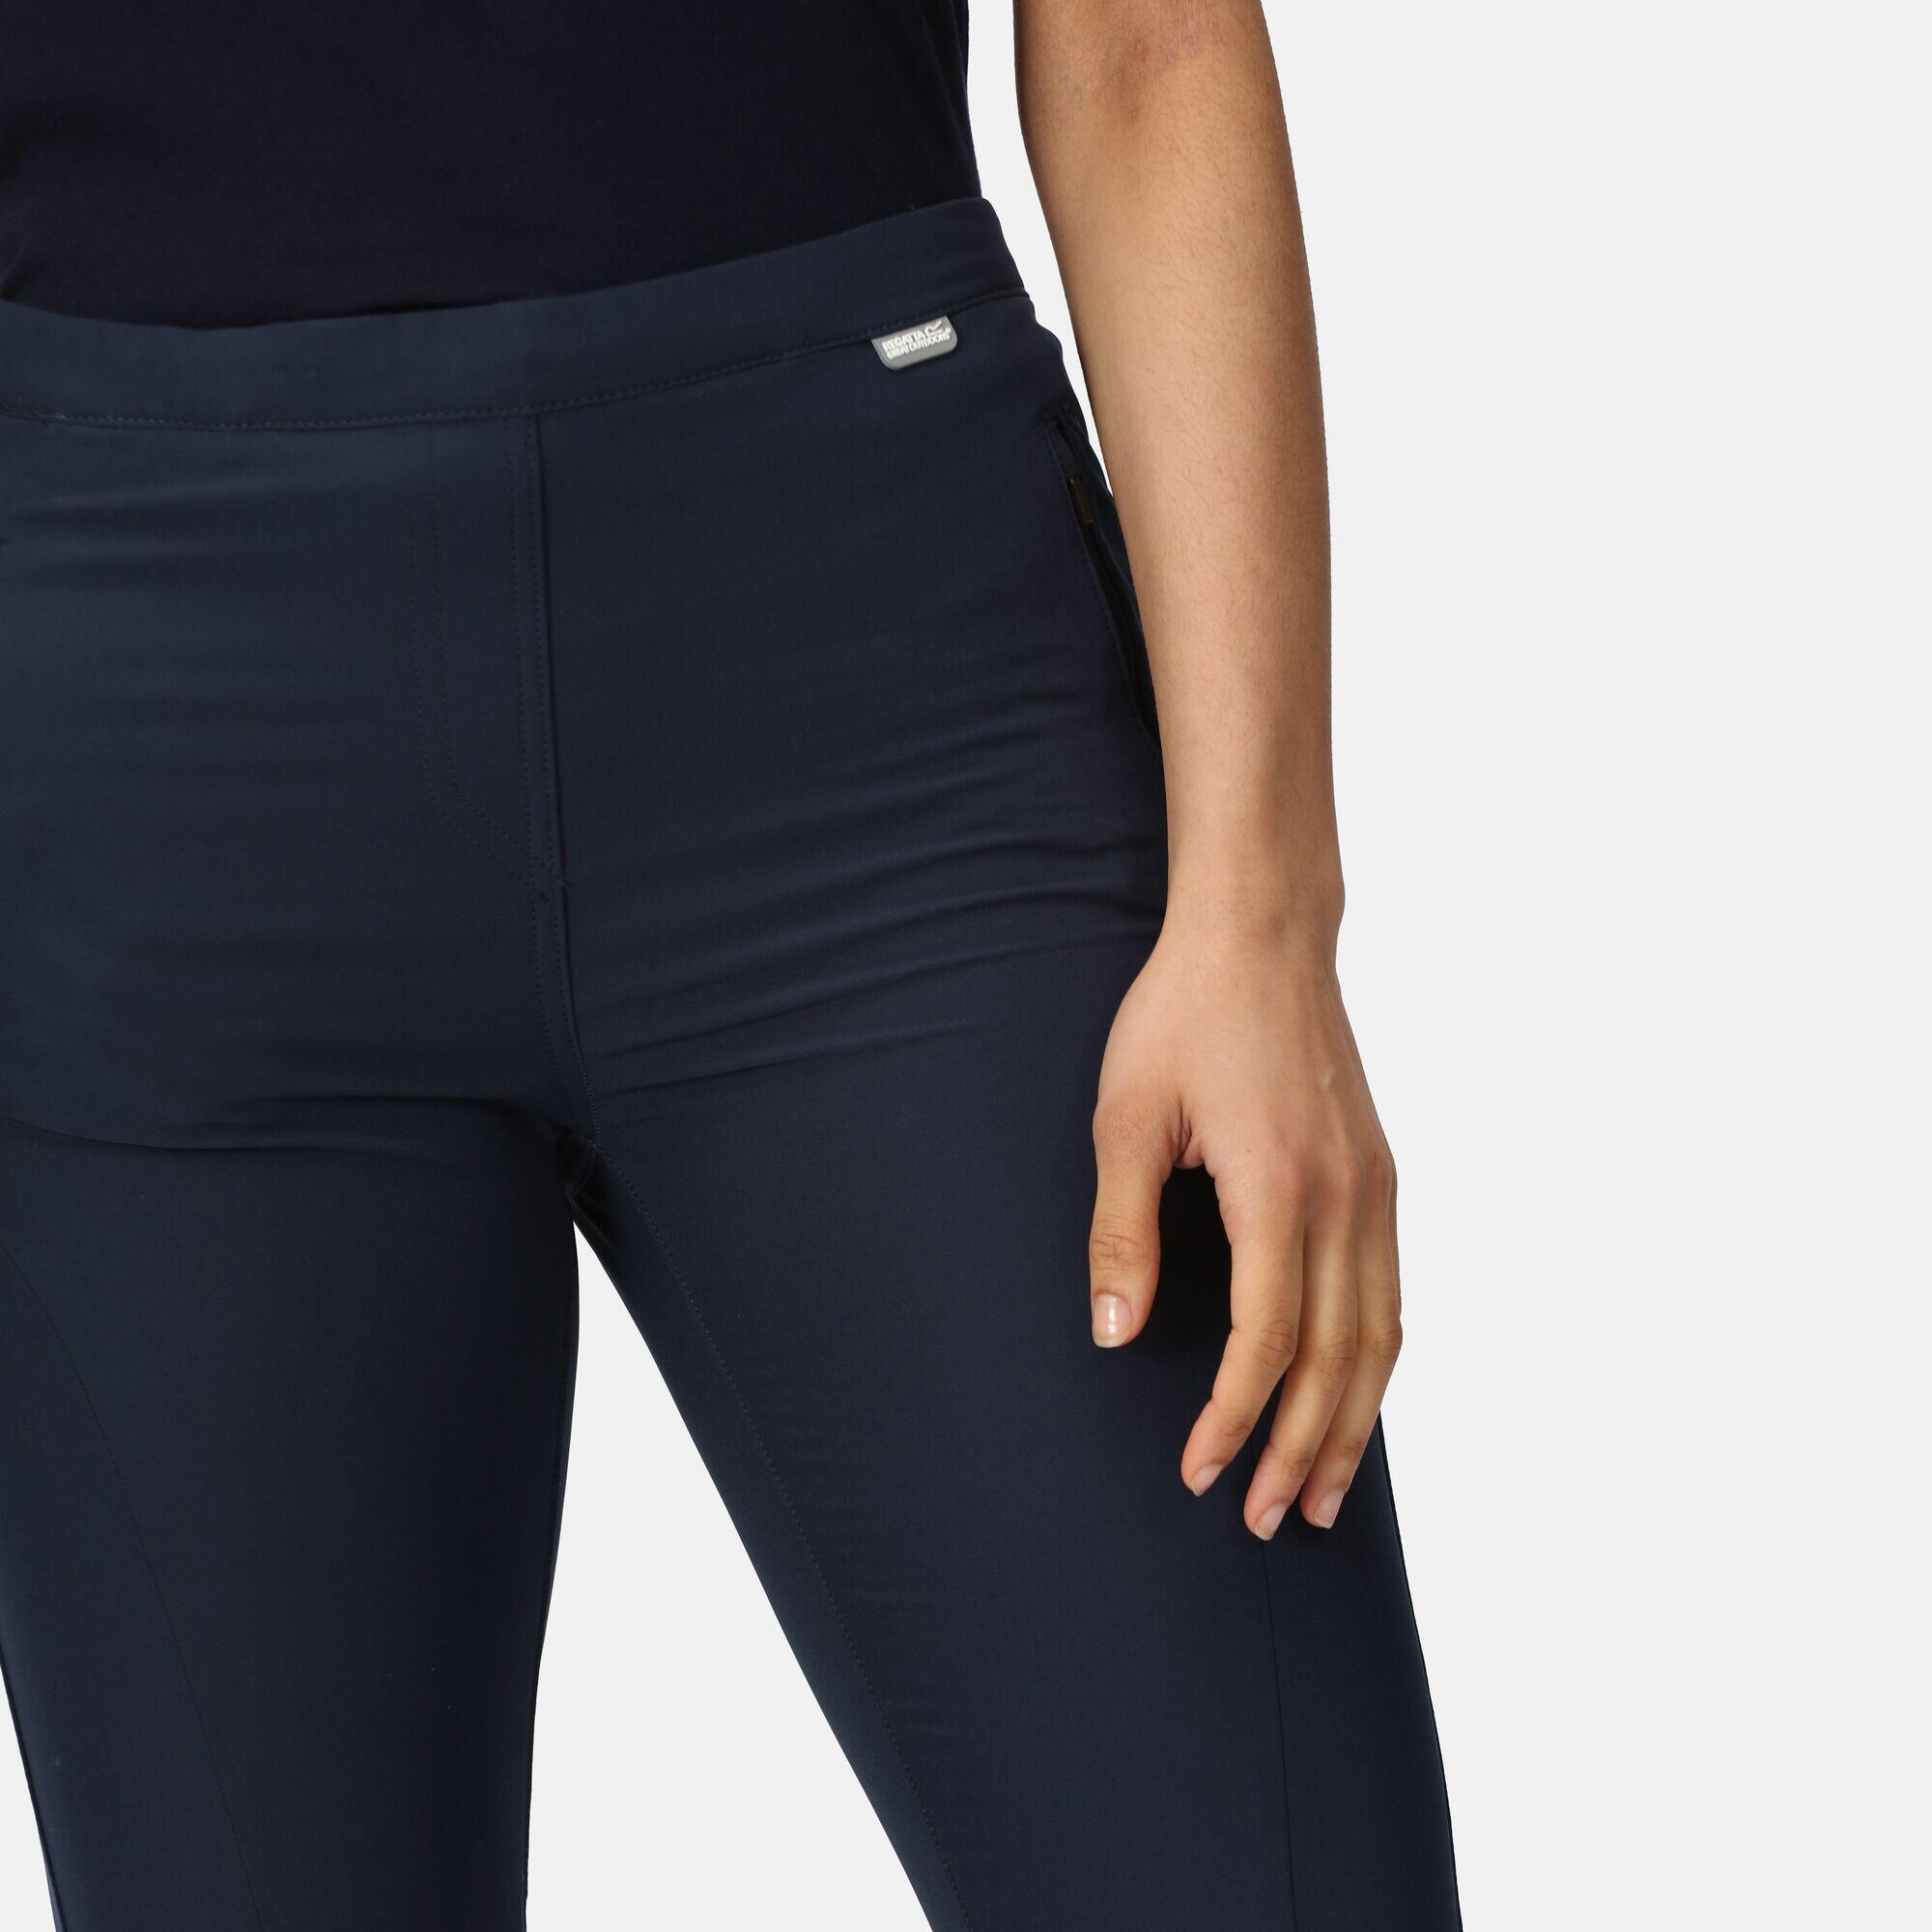 Pentre Stretch Women's Hiking Trousers - Navy 4/5